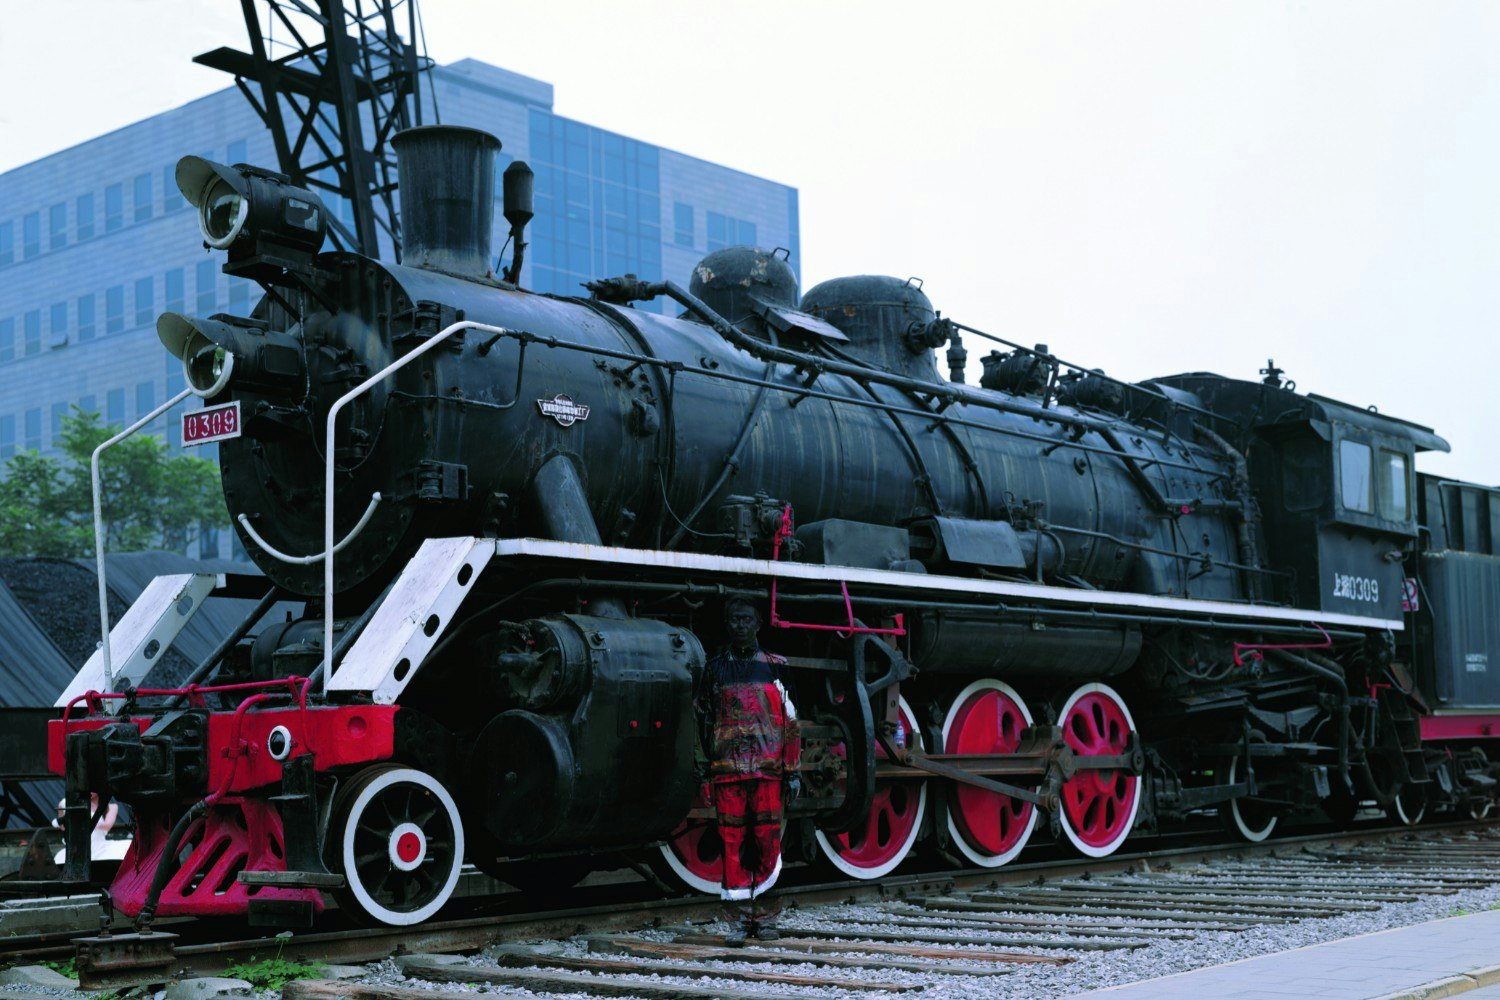 Travel News - Liu Bolin Hiding in the City No.73 Decorated With Locomotive Bel-Air Fine Art London (Beijing) 2008